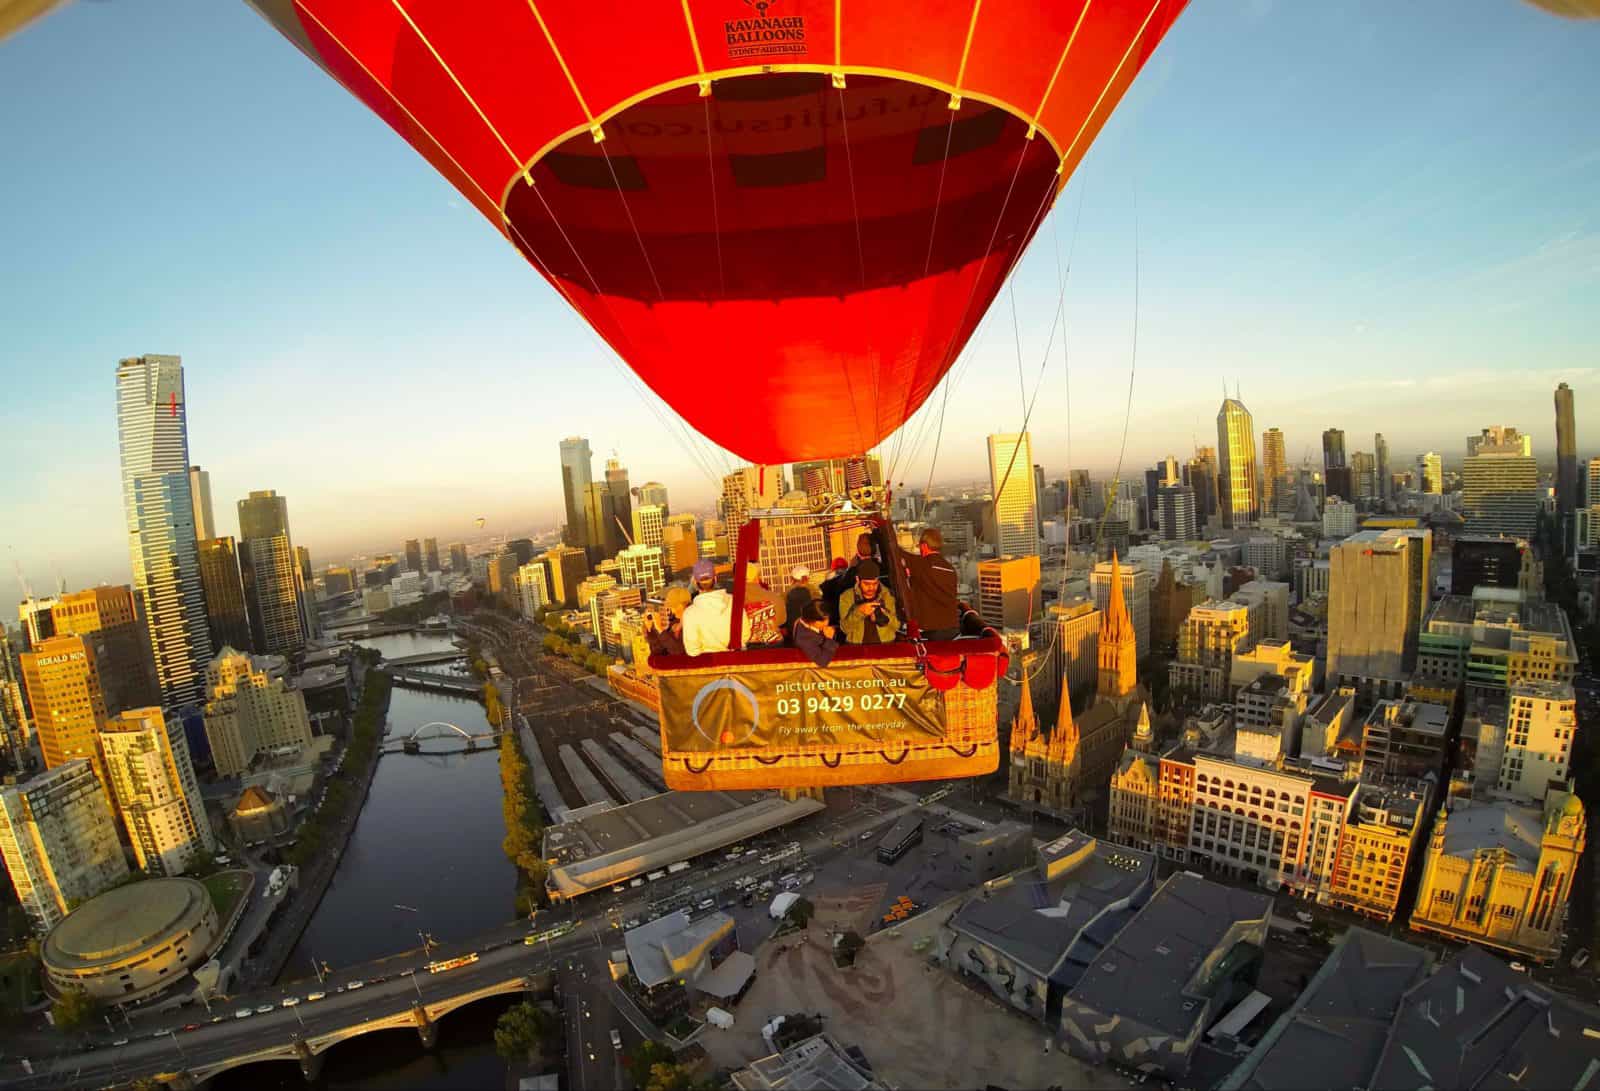 Melbourne hot air balloon flight with Picture This Ballooning